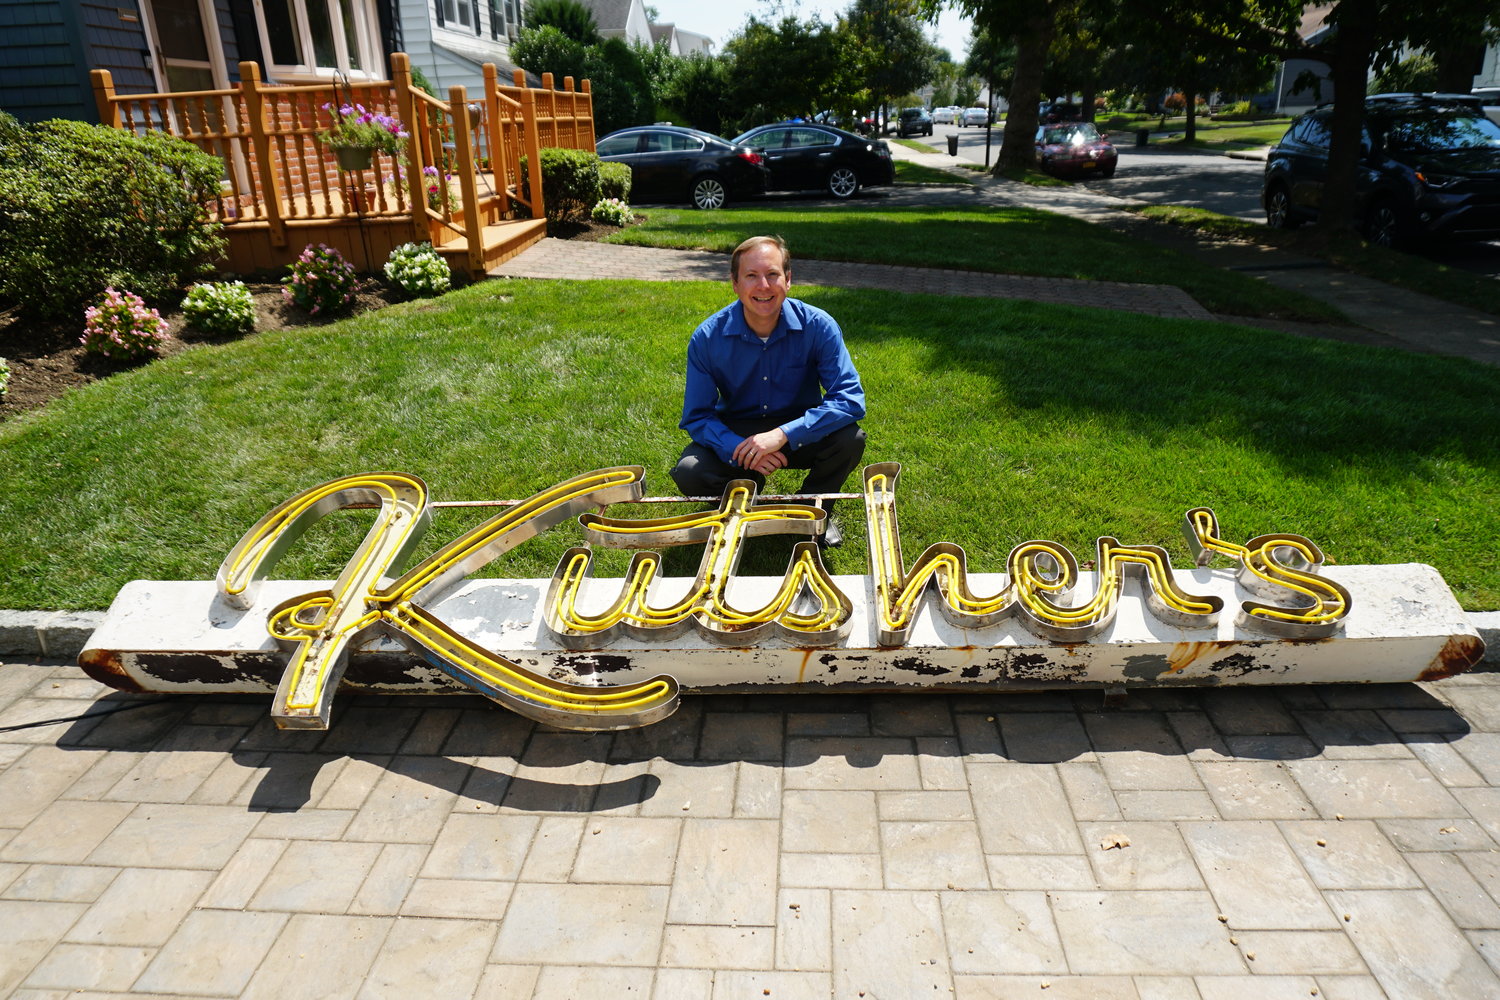 East Meadow resident Scott Eckers has been holding on to a big piece of Catskills history in his garage for the past eight years. Now the large neon sign is heading to a museum.